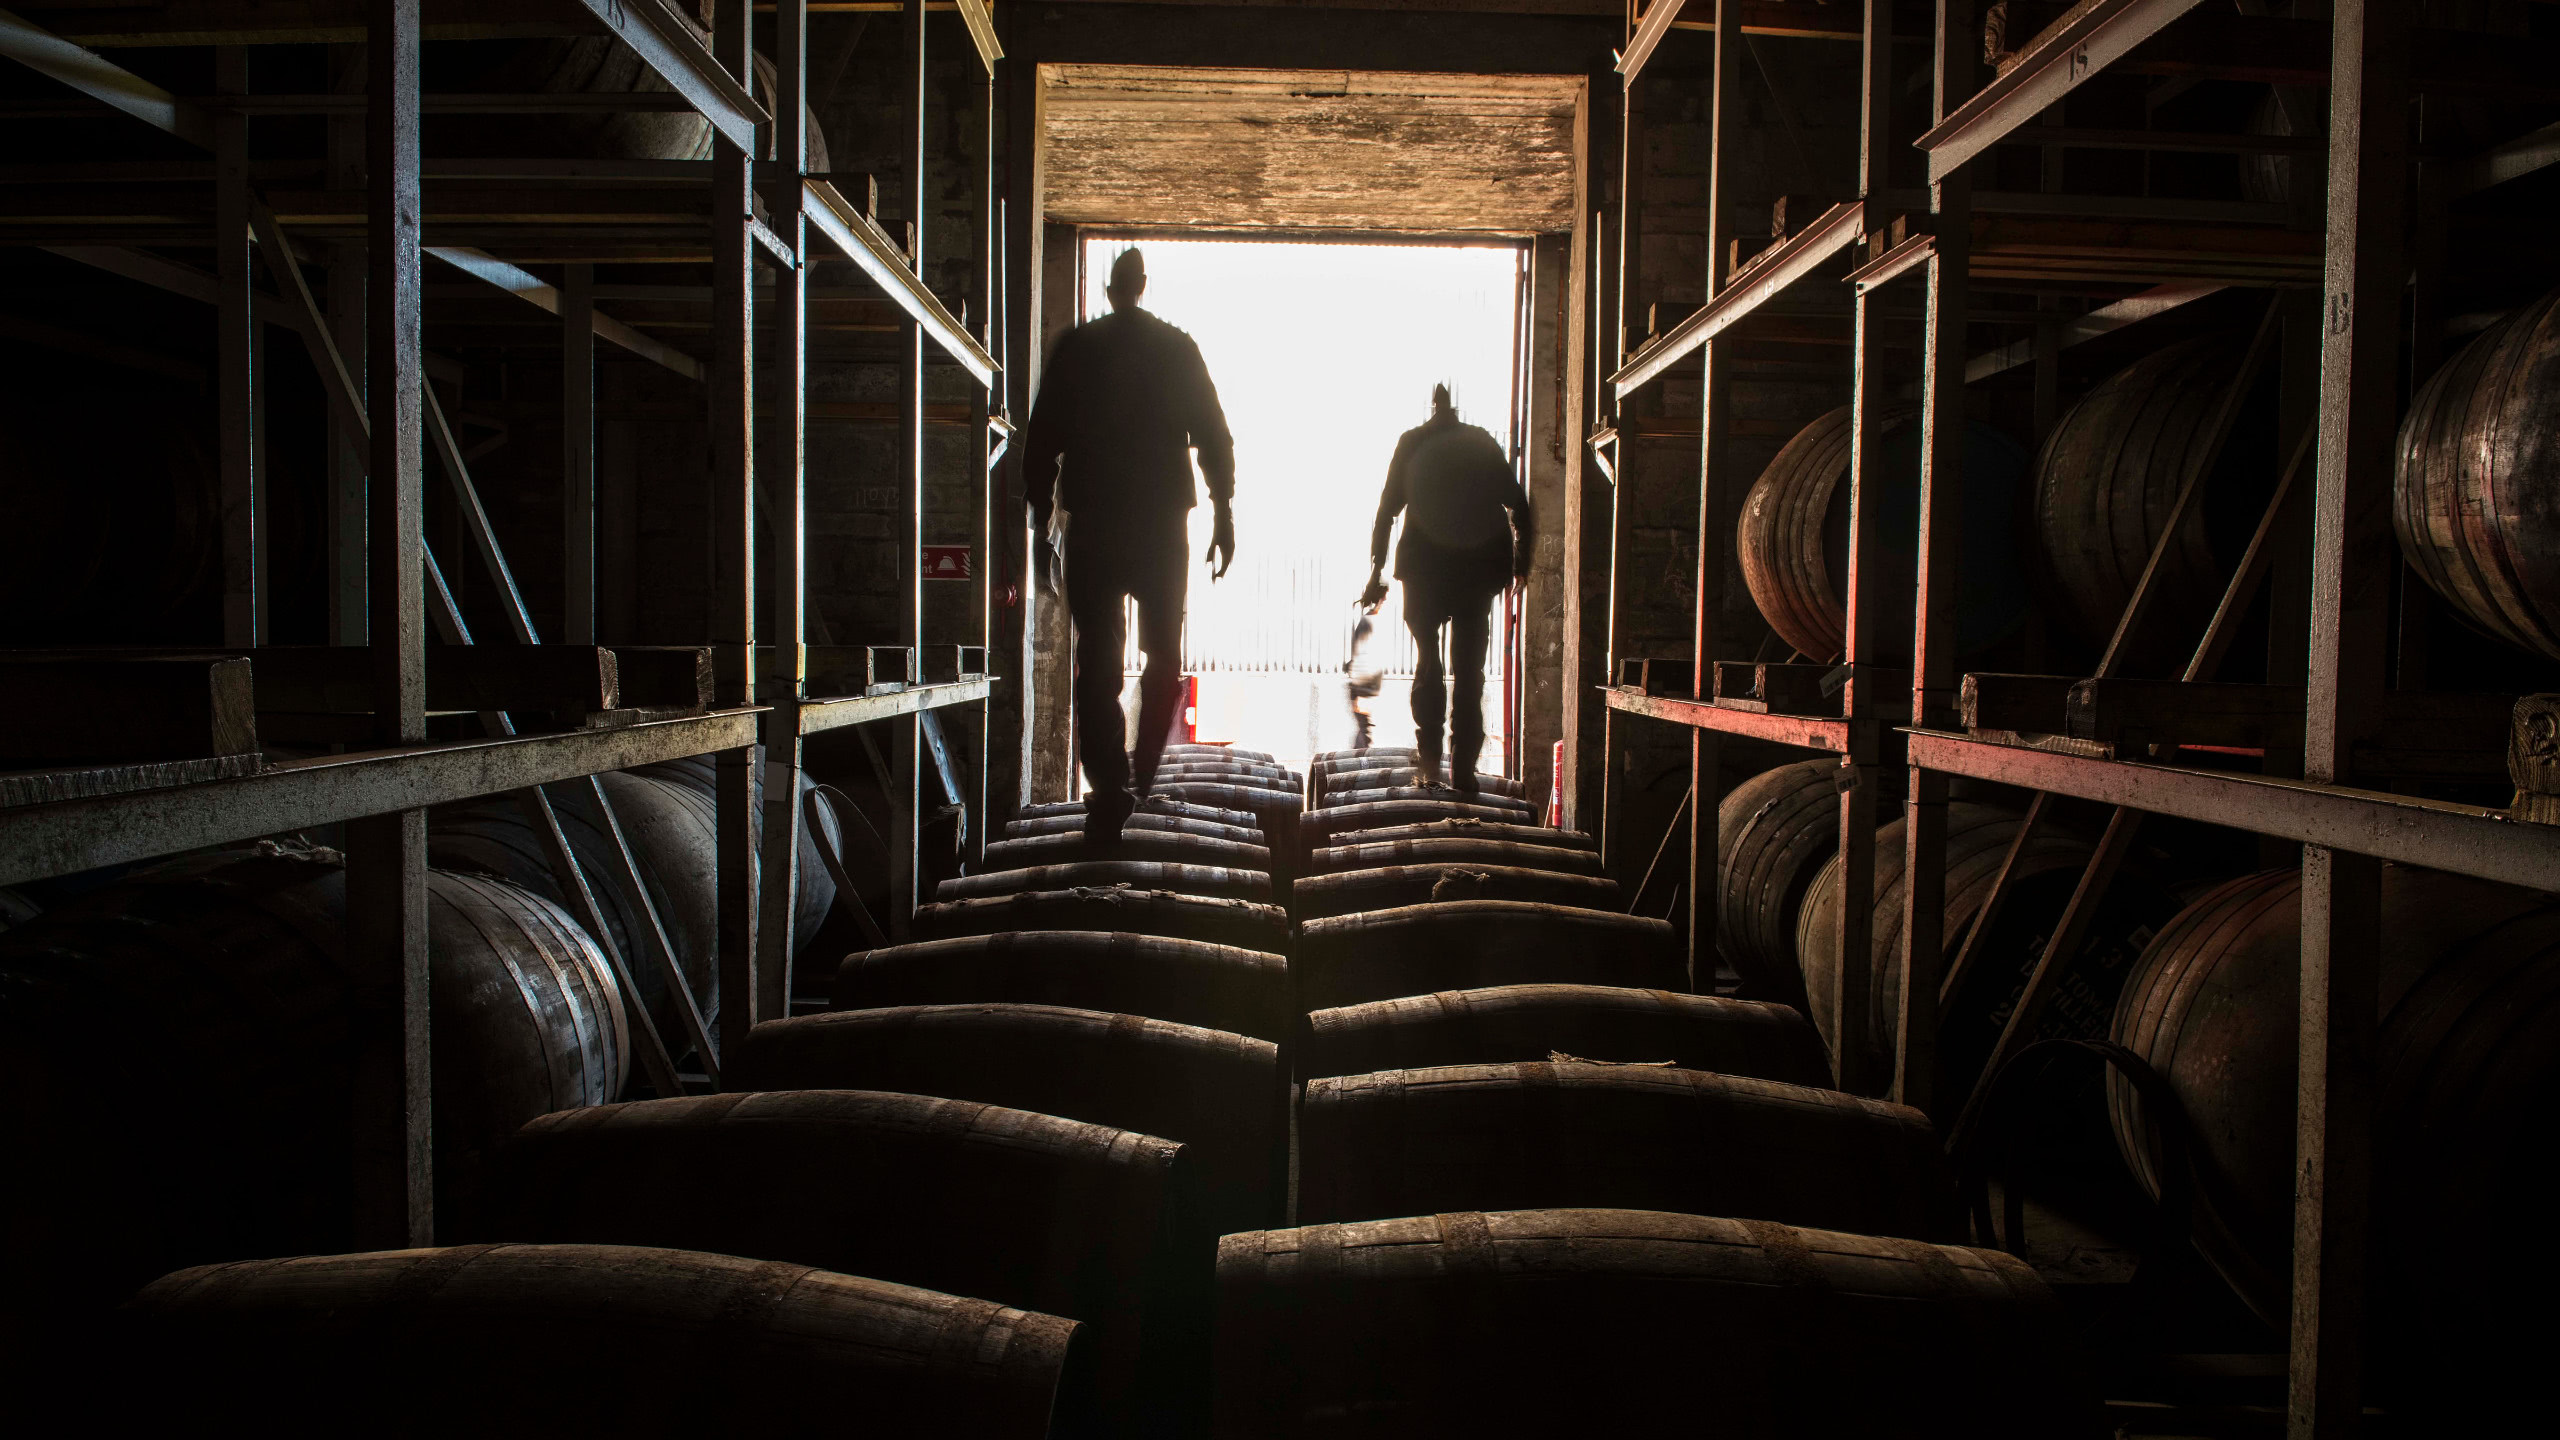 Two people walking on top of a line of whisky barrels